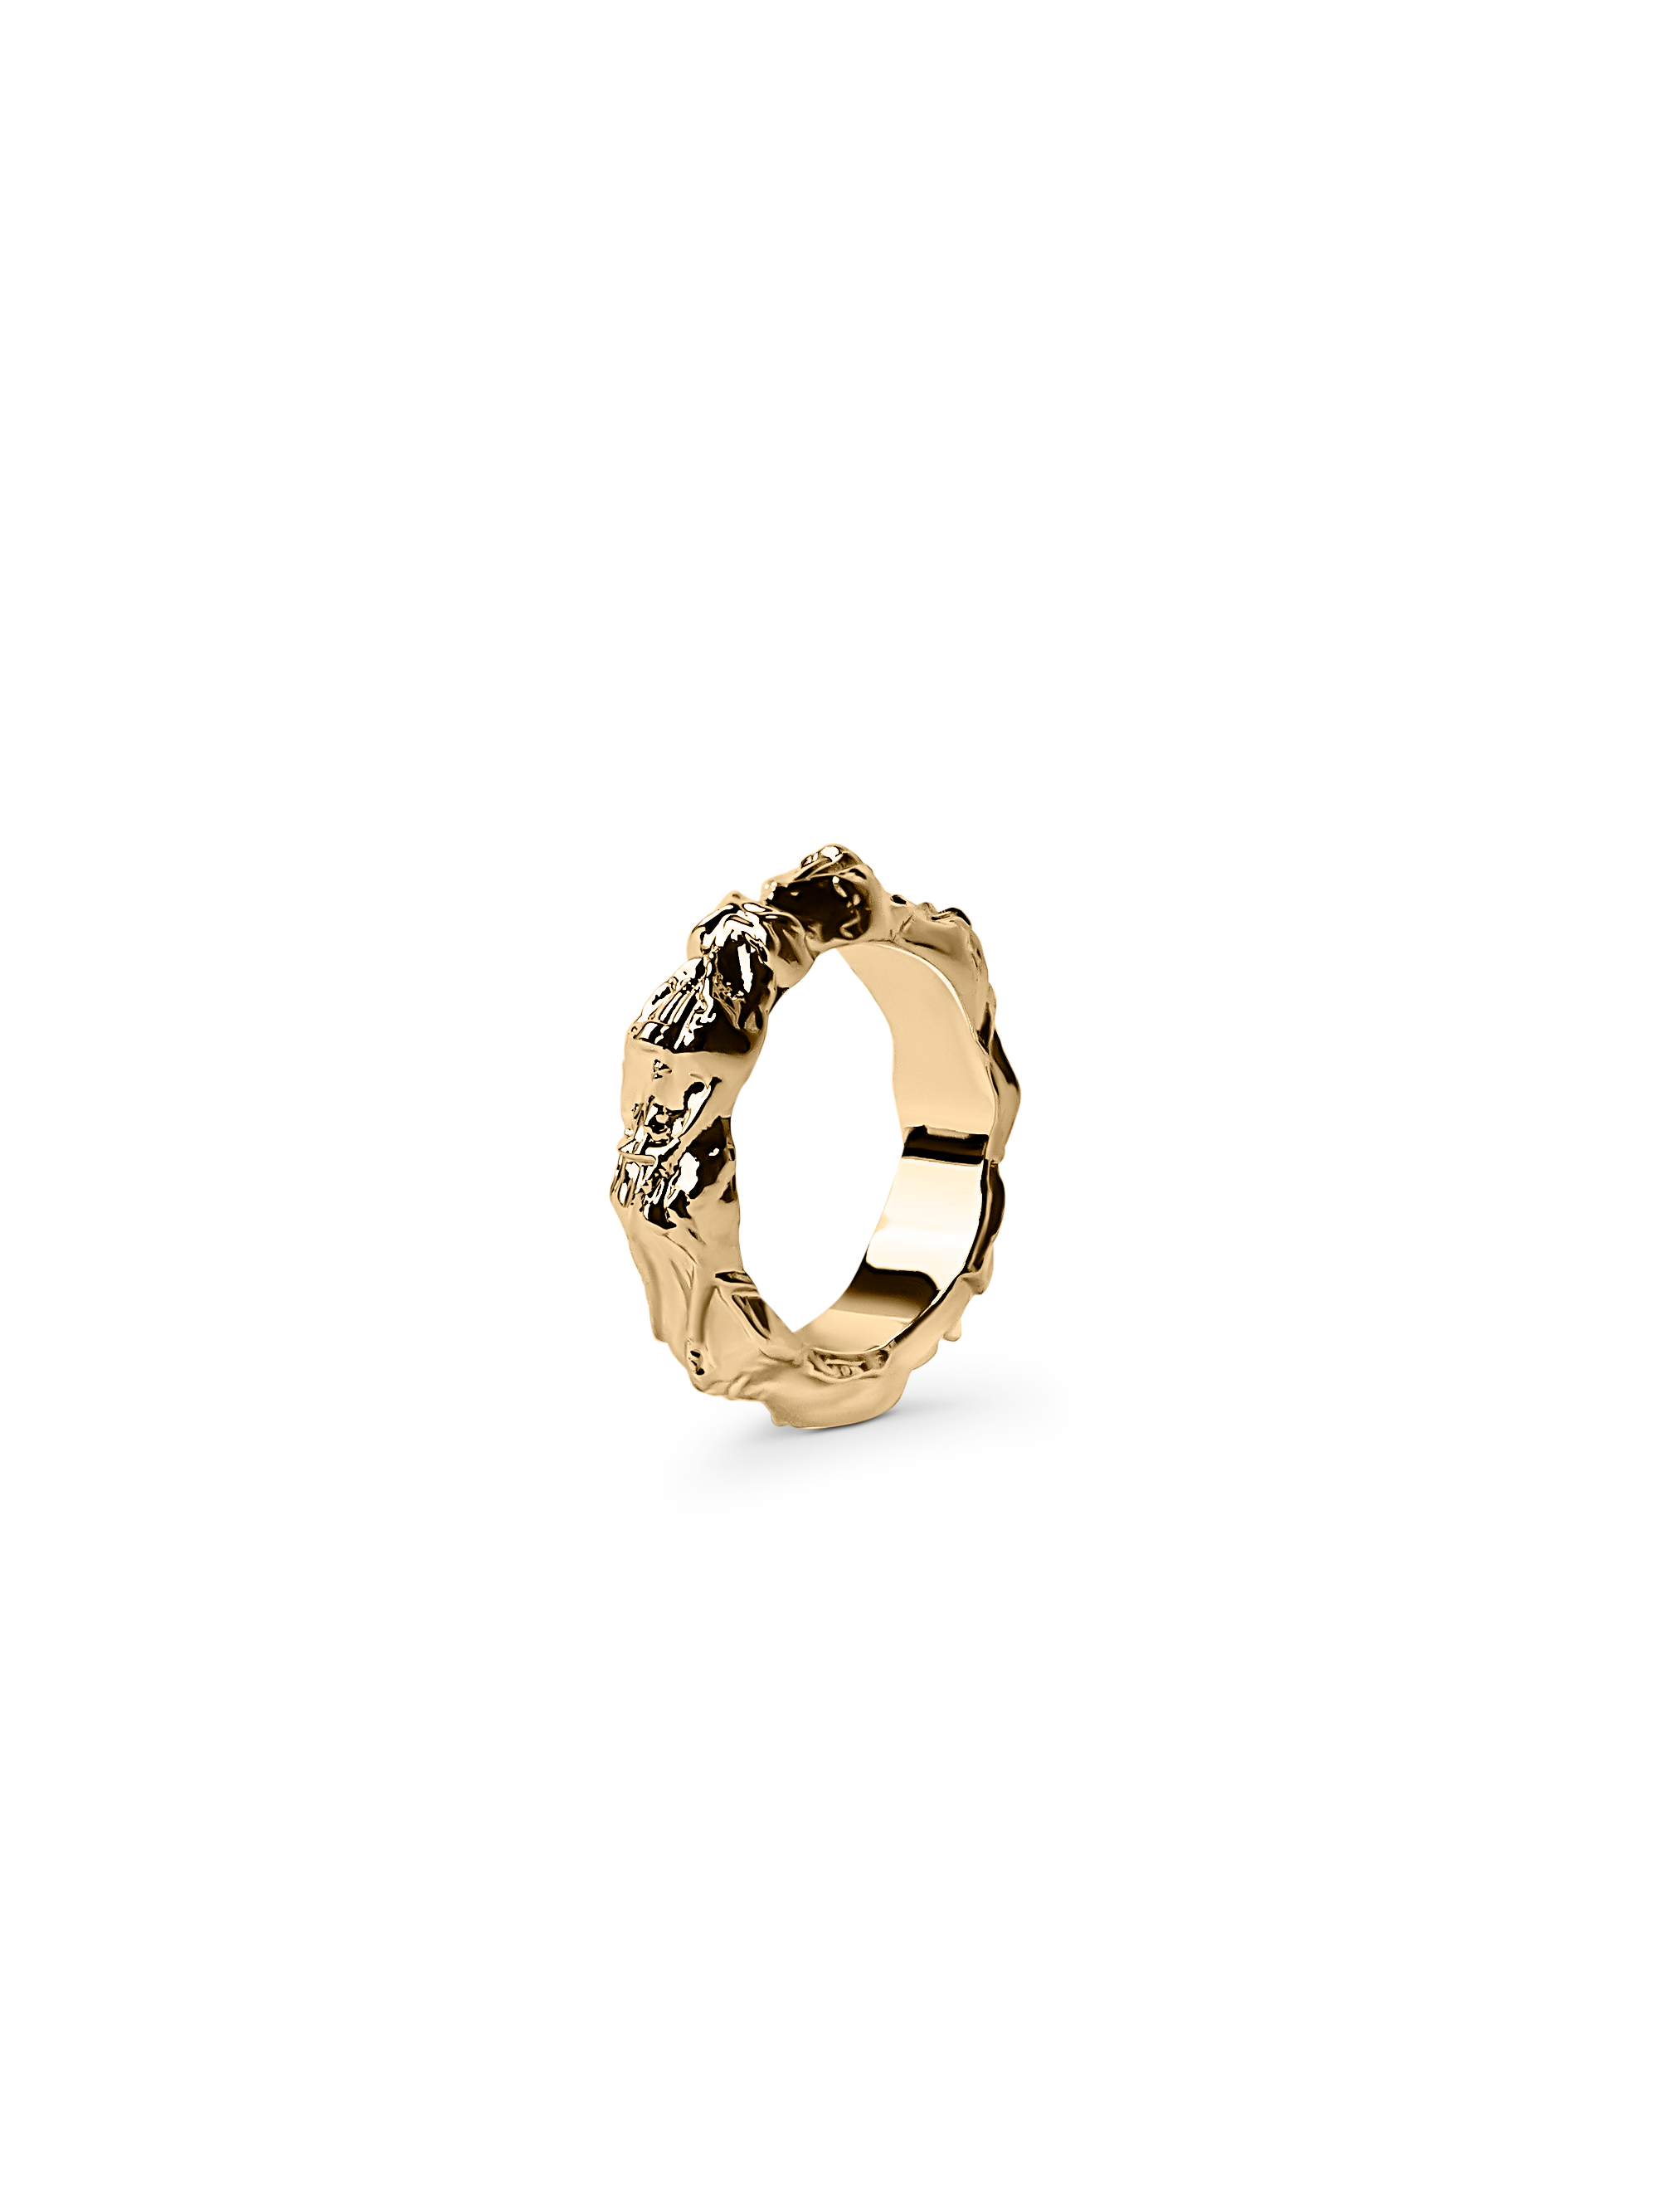 hammered ring 18k gold plated brass 